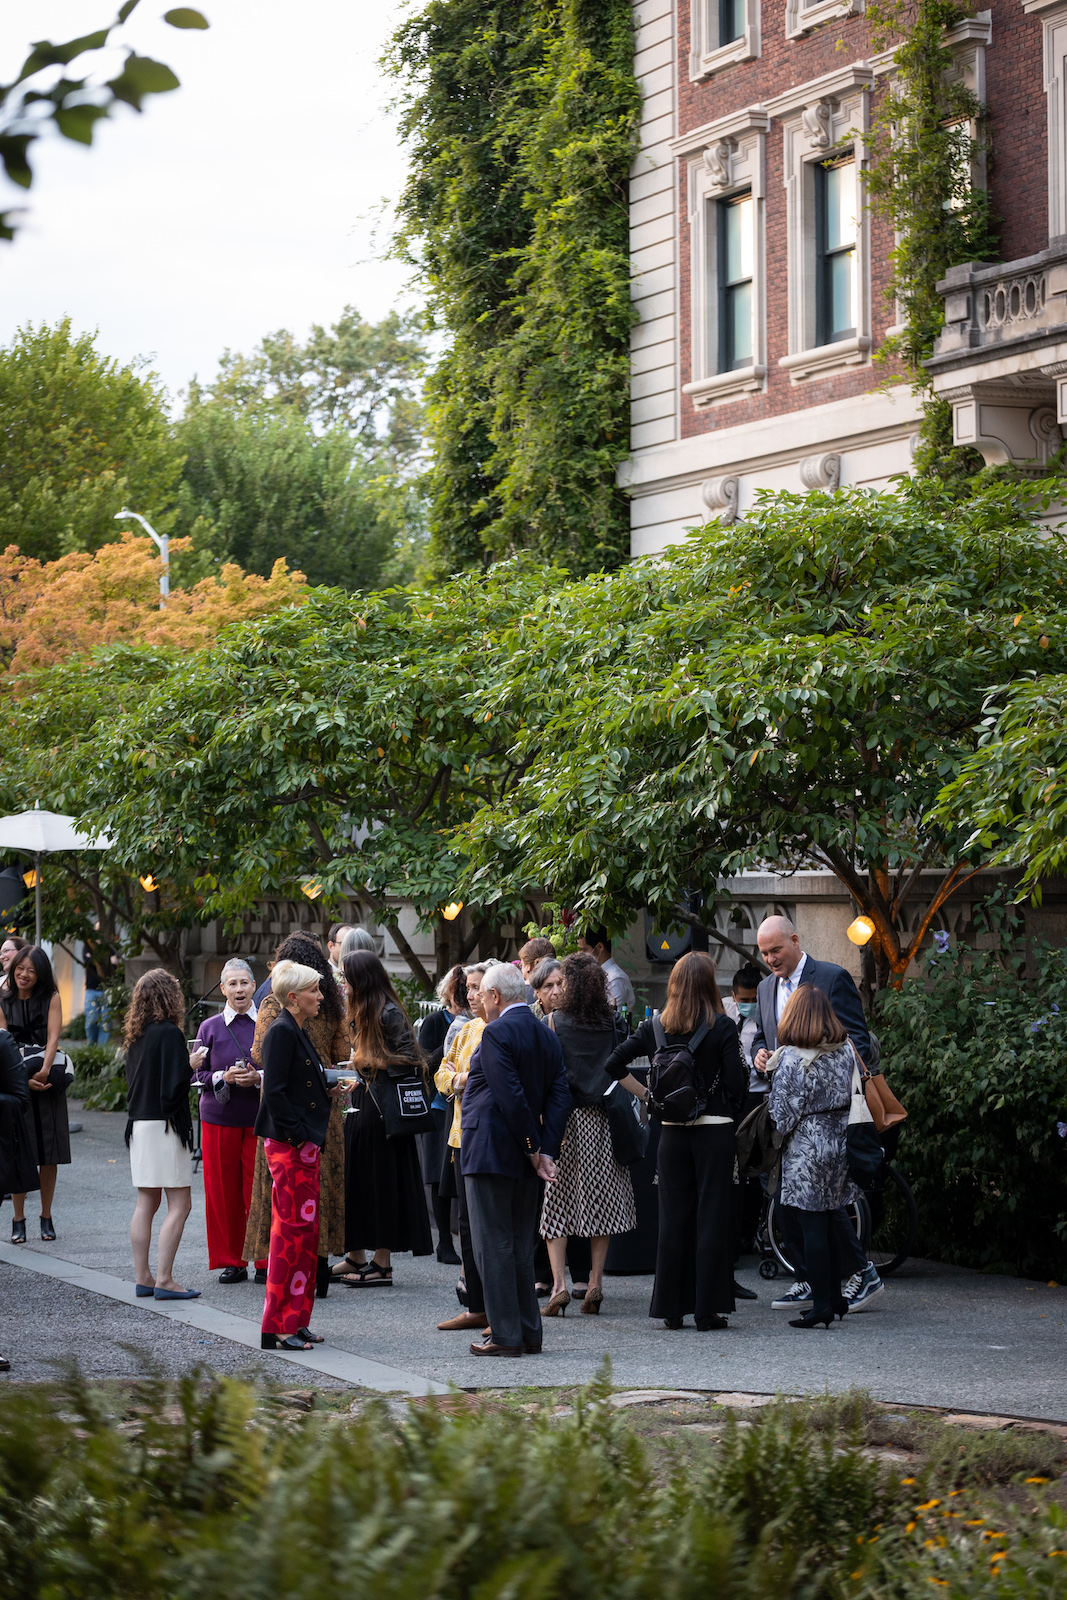 A group of well-dressed people standing drinking and talking in the Cooper Hewitt garden. There is a line of green trees behind them and part of the back façade of the Georgian-style mansion